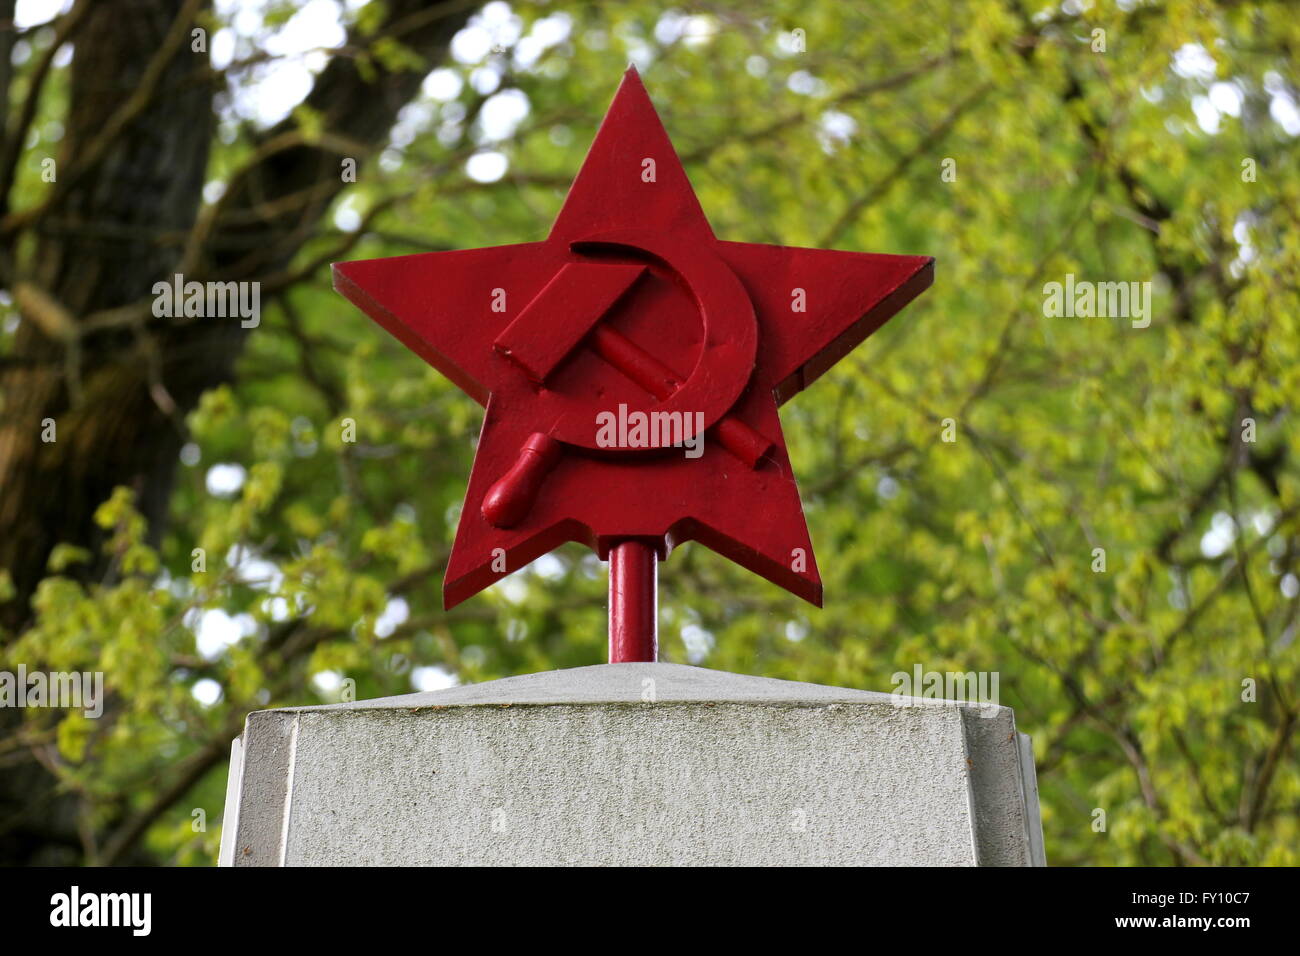 Red star with hammer and sickle, a memorial for the fallen russian soldiers in WWII, on a cemetary in Greifswald, Germany. Stock Photo